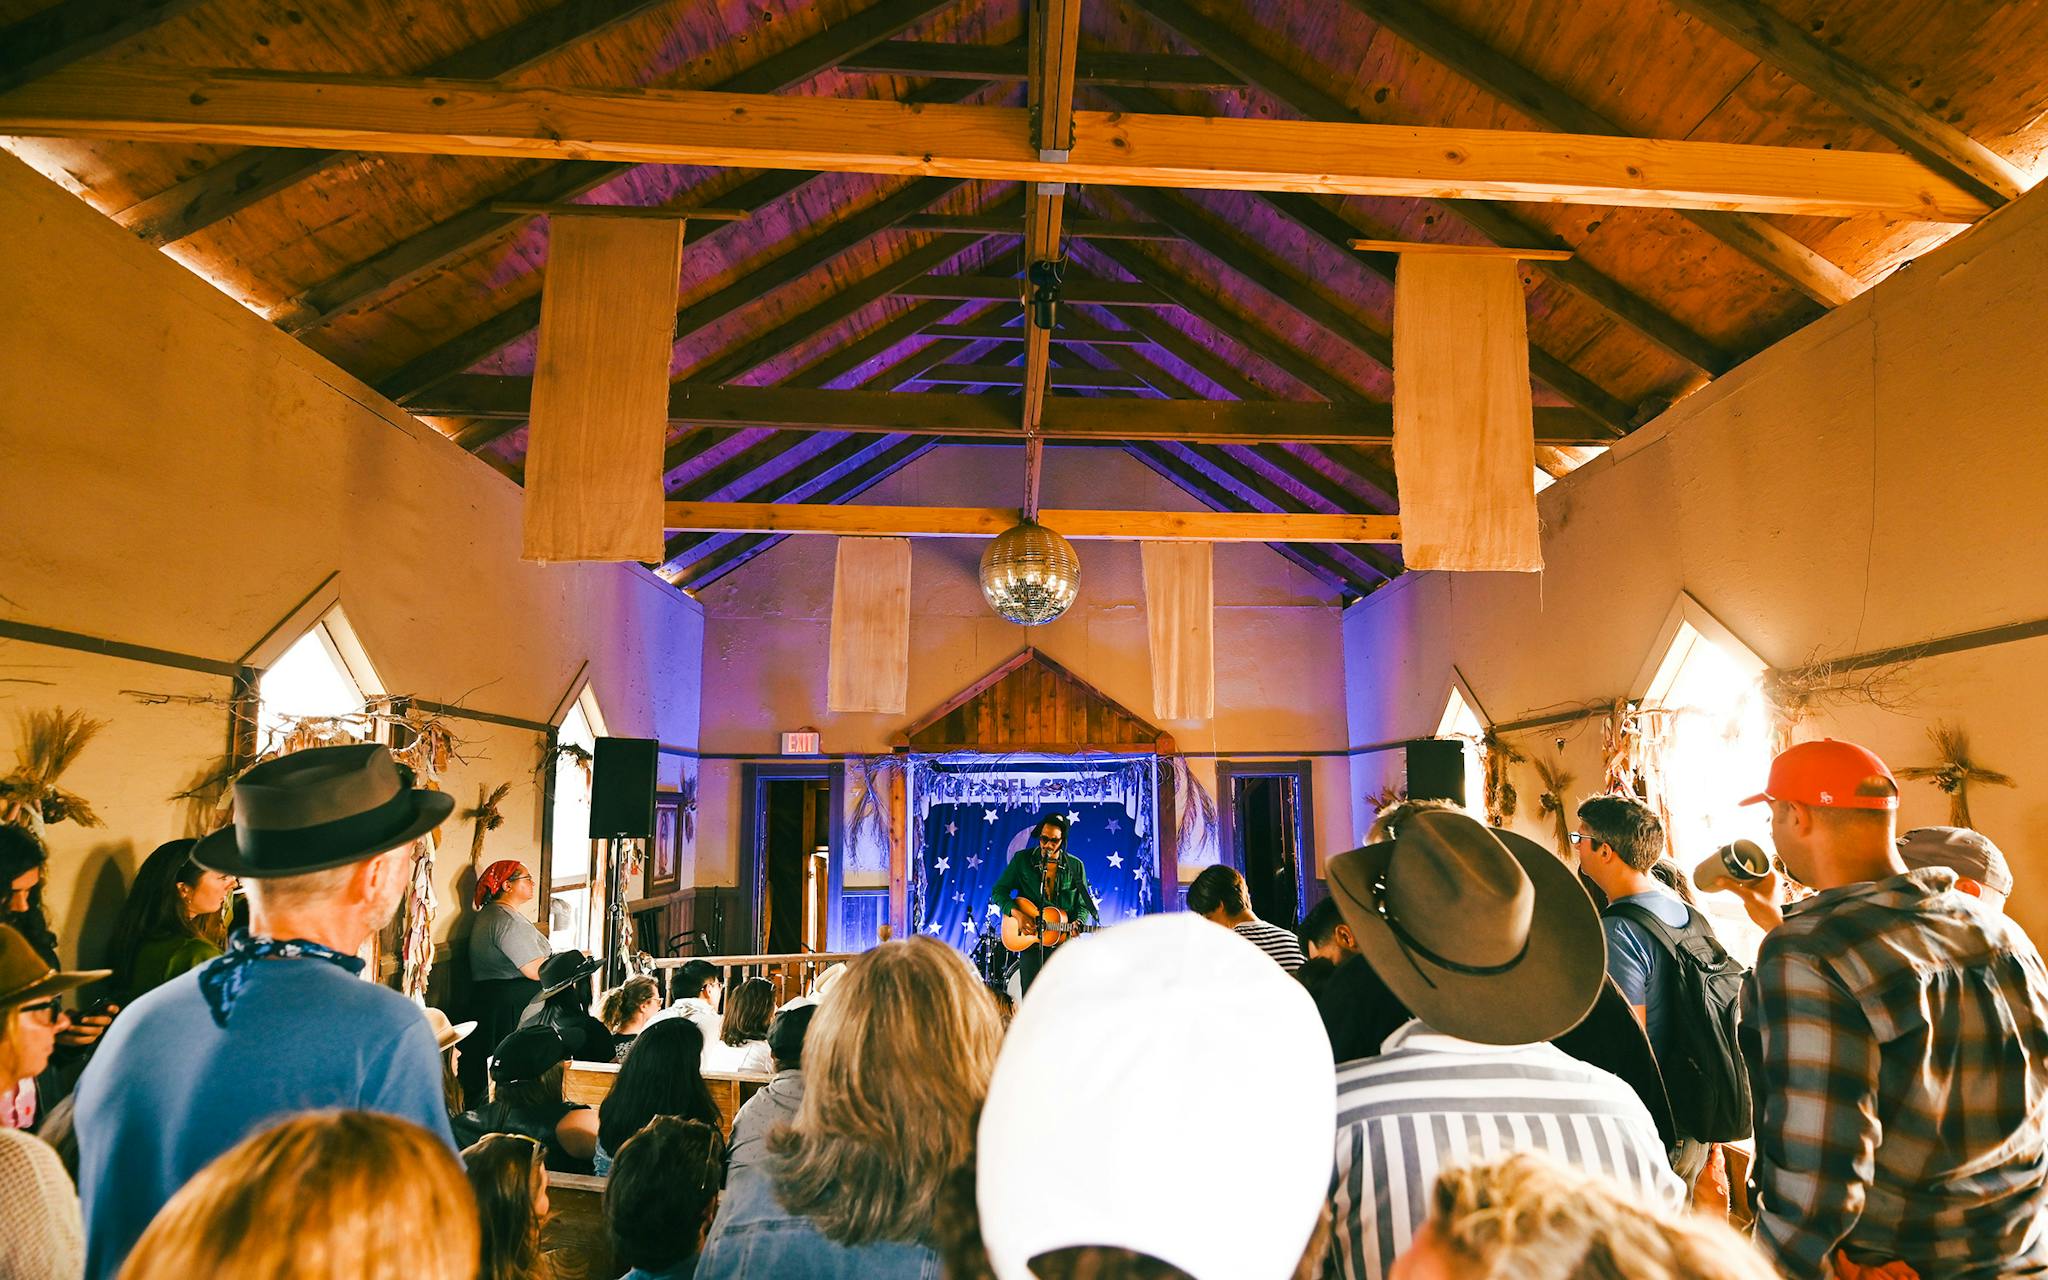 Singer-songwriter Tré Burt performed to a packed crowd inside the chapel.